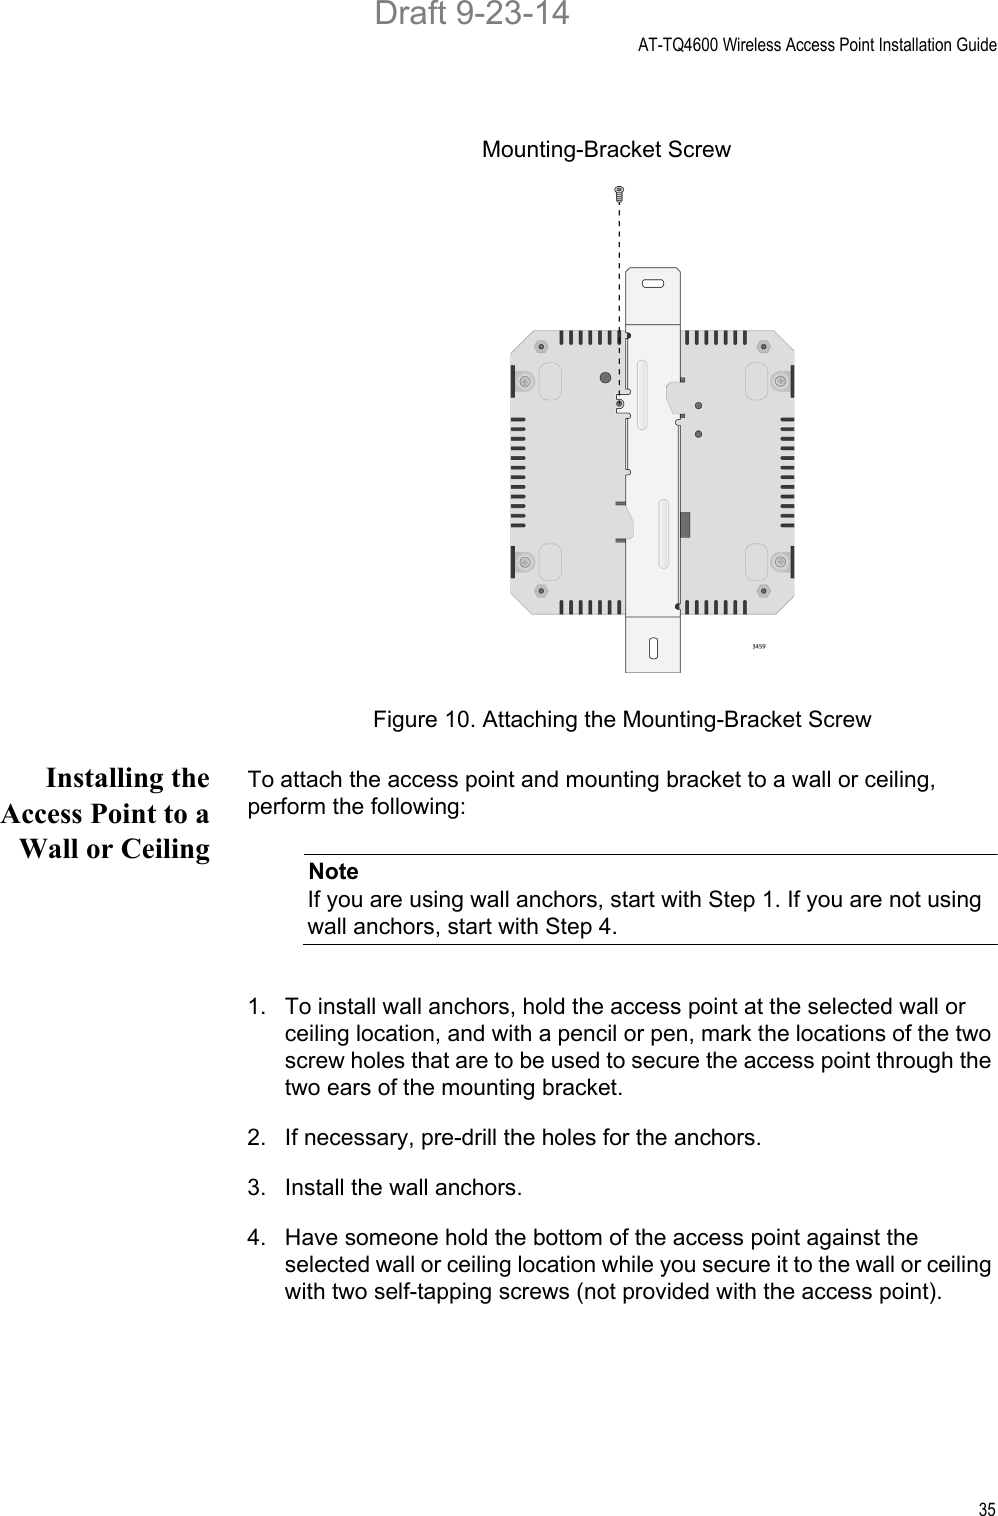 AT-TQ4600 Wireless Access Point Installation Guide35Figure 10. Attaching the Mounting-Bracket ScrewInstalling theAccess Point to aWall or CeilingTo attach the access point and mounting bracket to a wall or ceiling, perform the following:NoteIf you are using wall anchors, start with Step 1. If you are not using wall anchors, start with Step 4.1. To install wall anchors, hold the access point at the selected wall or ceiling location, and with a pencil or pen, mark the locations of the two screw holes that are to be used to secure the access point through the two ears of the mounting bracket.2. If necessary, pre-drill the holes for the anchors.3. Install the wall anchors.4. Have someone hold the bottom of the access point against the selected wall or ceiling location while you secure it to the wall or ceiling with two self-tapping screws (not provided with the access point).Mounting-Bracket ScrewDraft 9-23-14